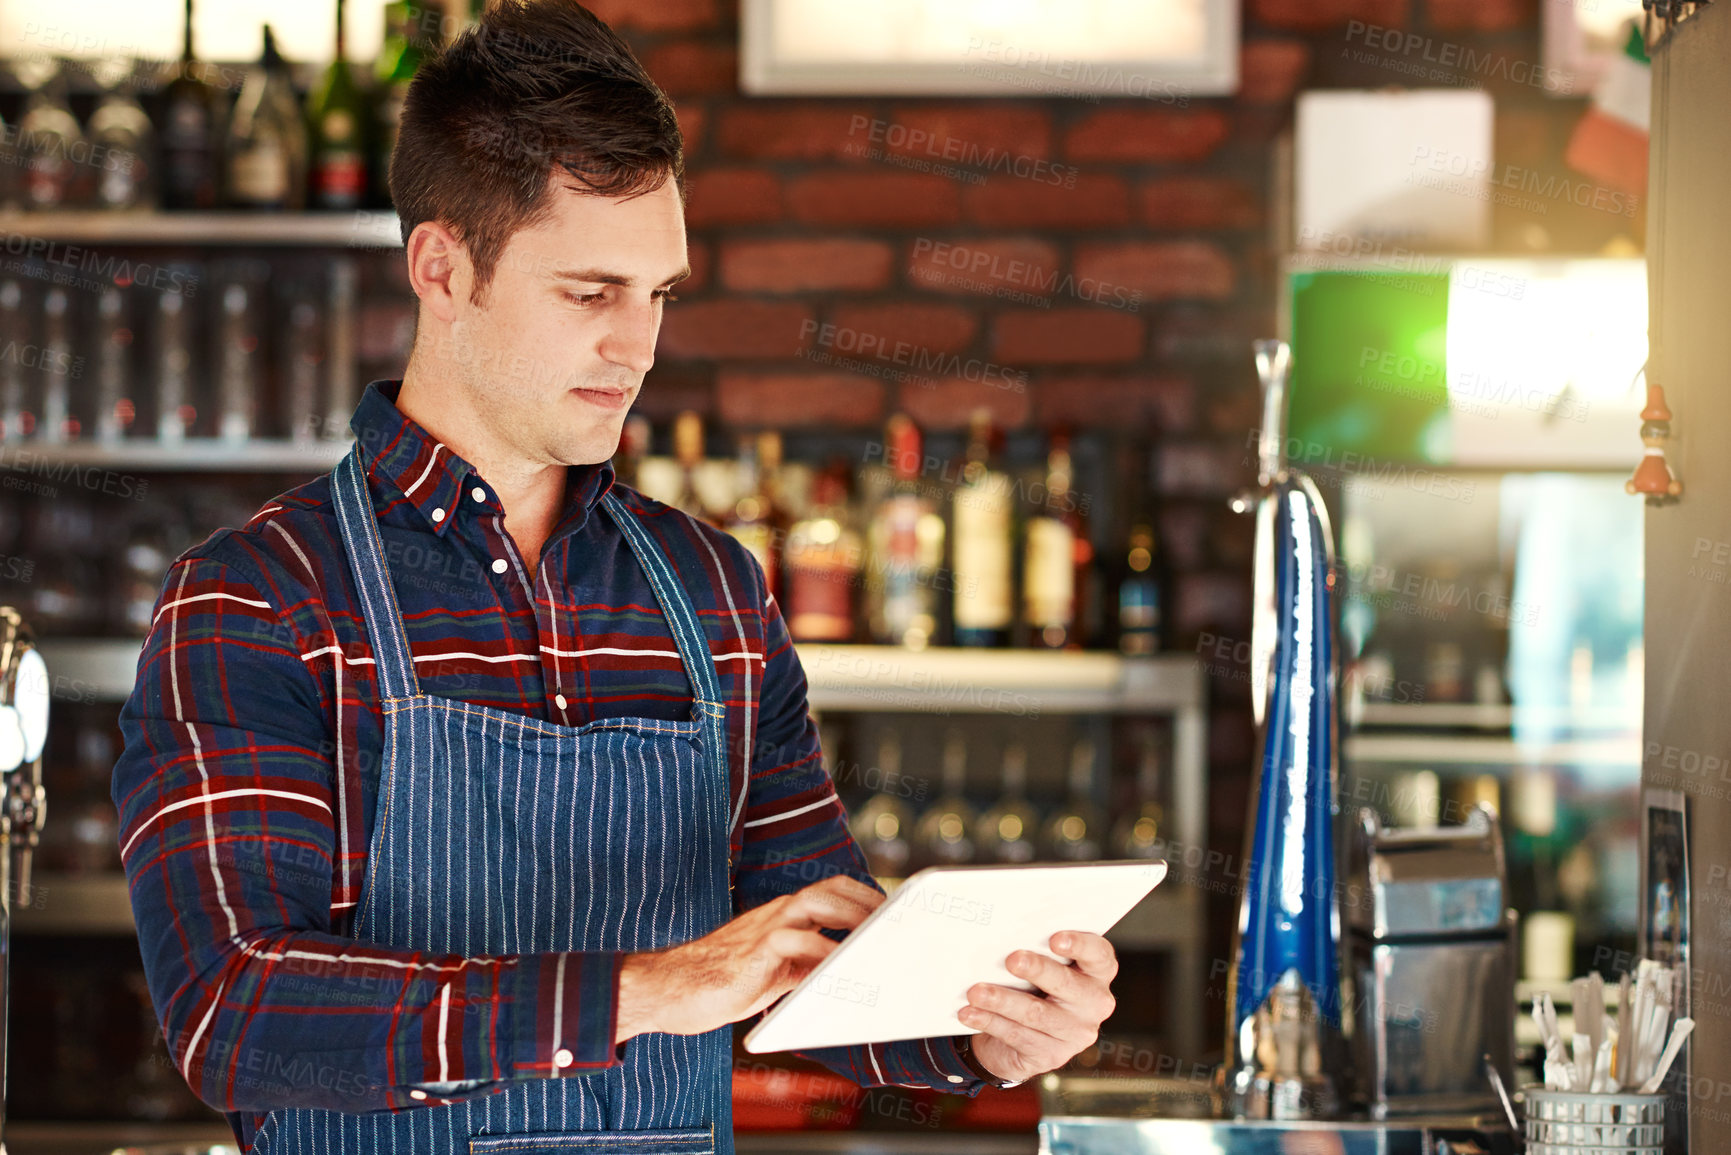 Buy stock photo Cropped shot of a restaurant owner using a digital tablet